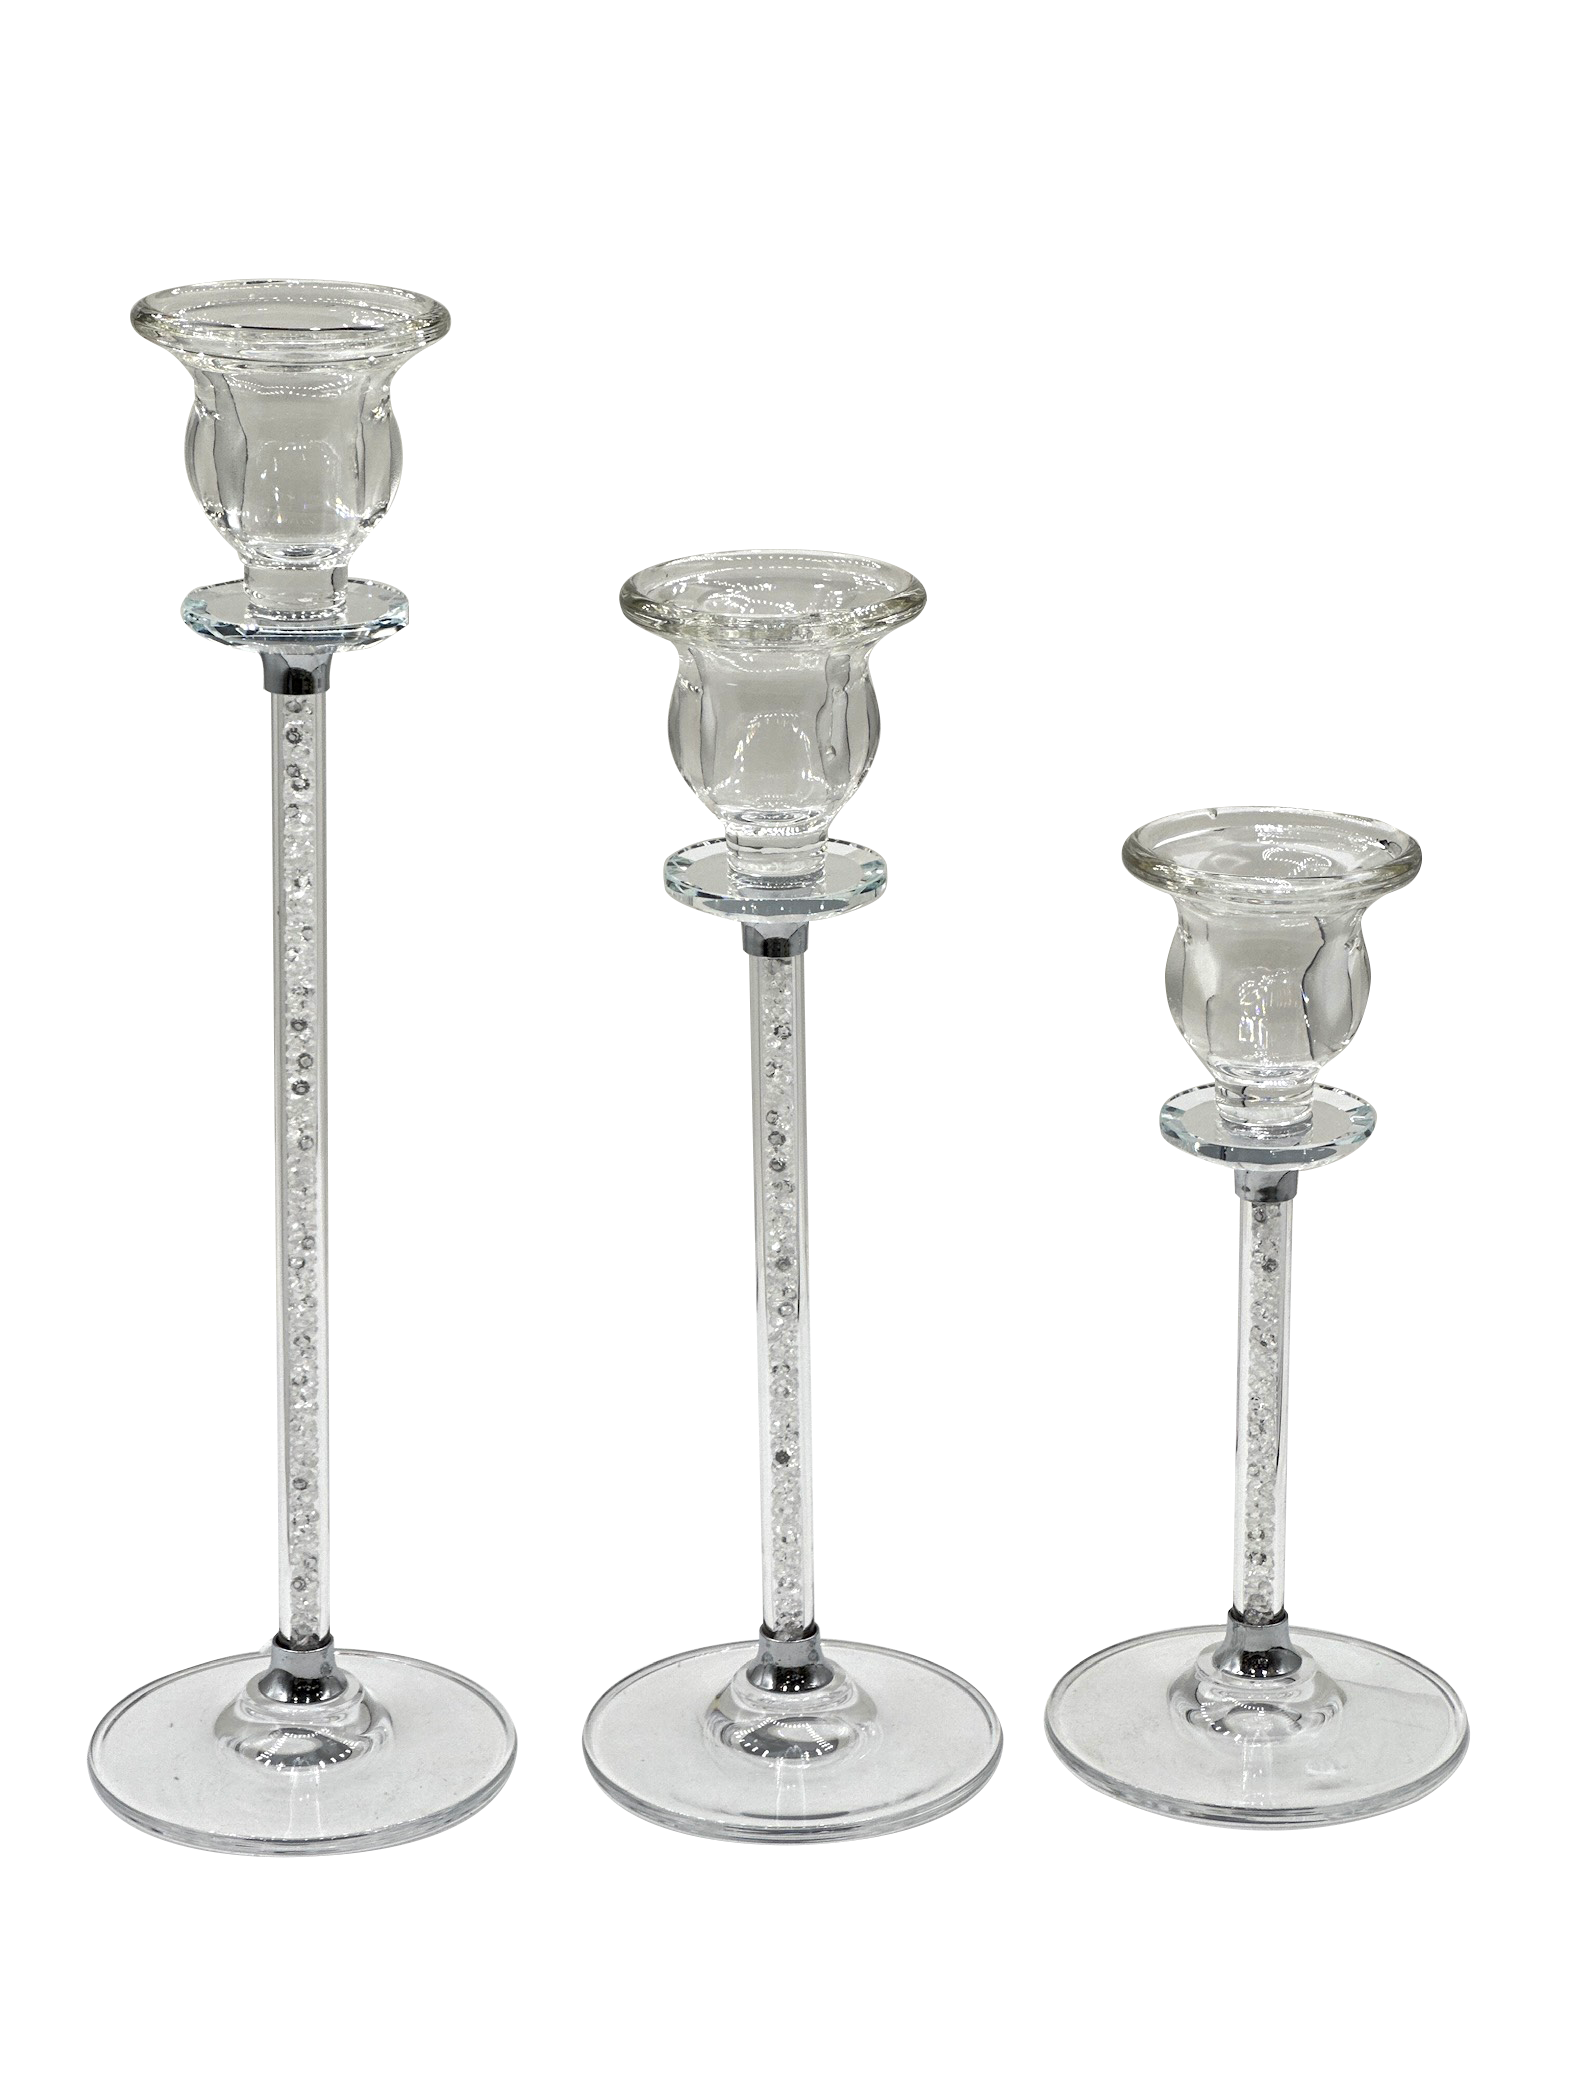 Crystal Candlesticks with Mirrored Base - Sunset Gifts Store